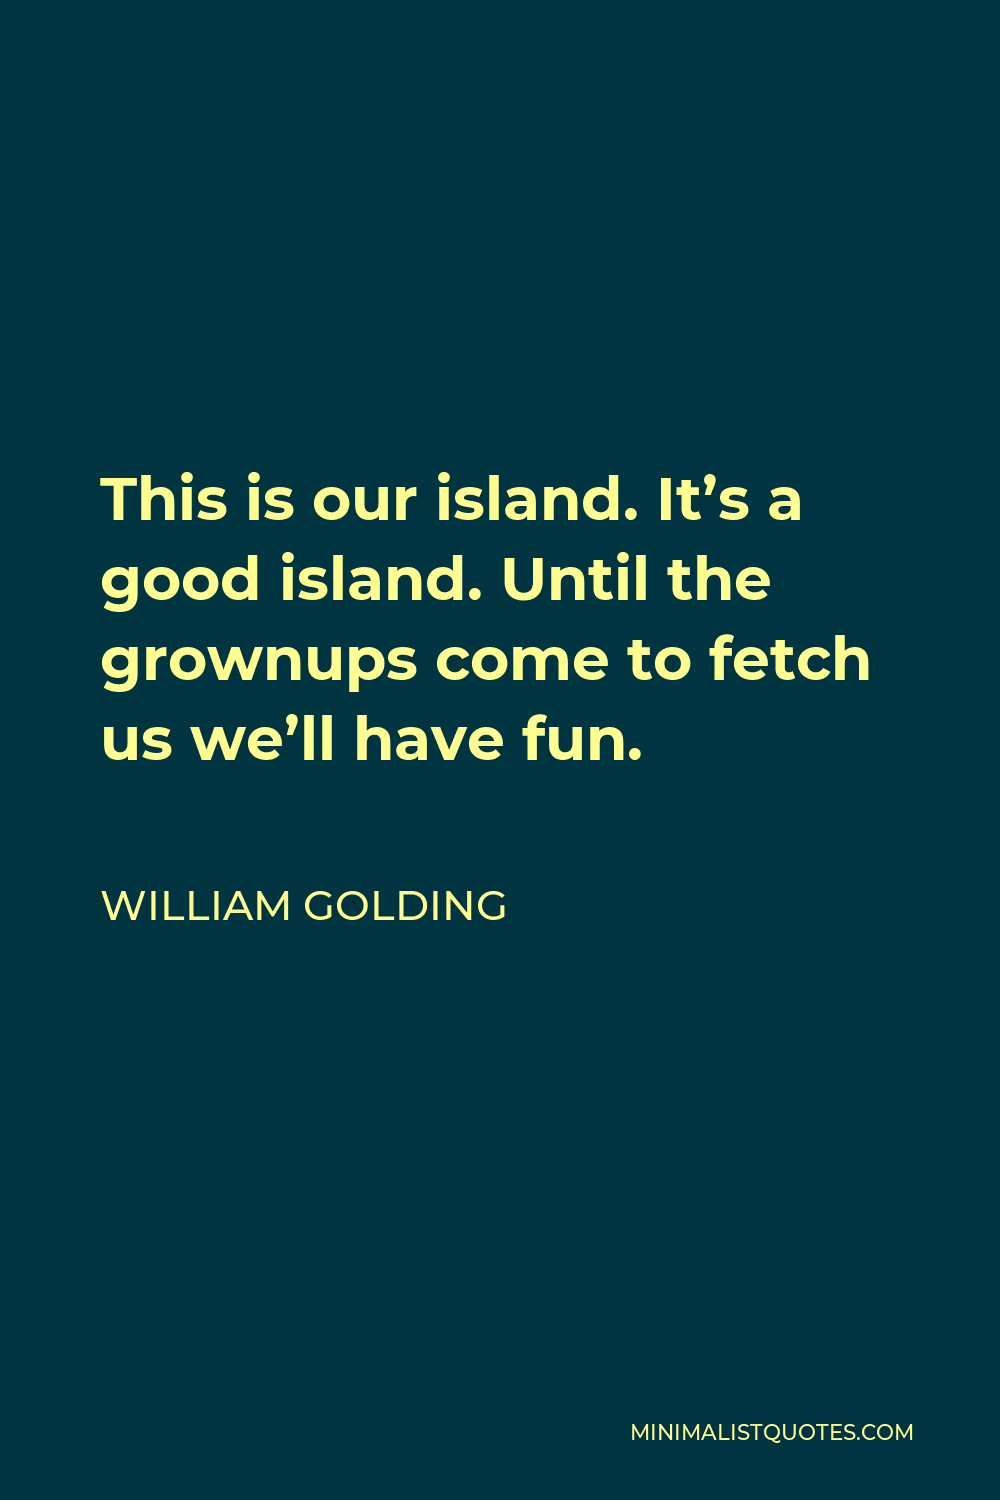 William Golding Quote - This is our island. It’s a good island. Until the grownups come to fetch us we’ll have fun.